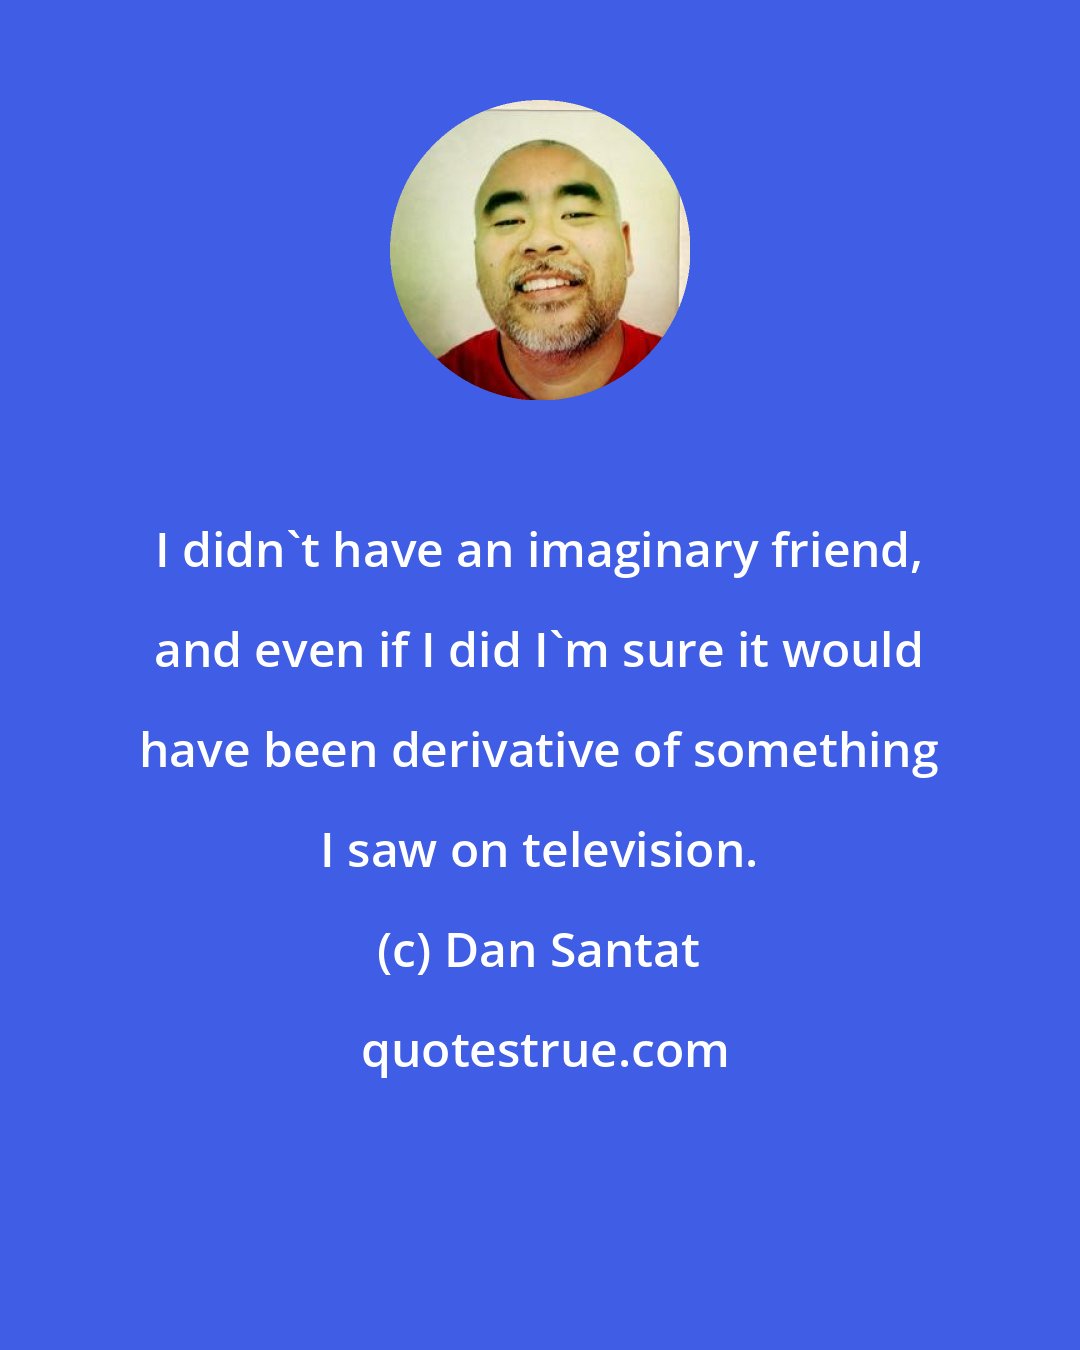 Dan Santat: I didn't have an imaginary friend, and even if I did I'm sure it would have been derivative of something I saw on television.